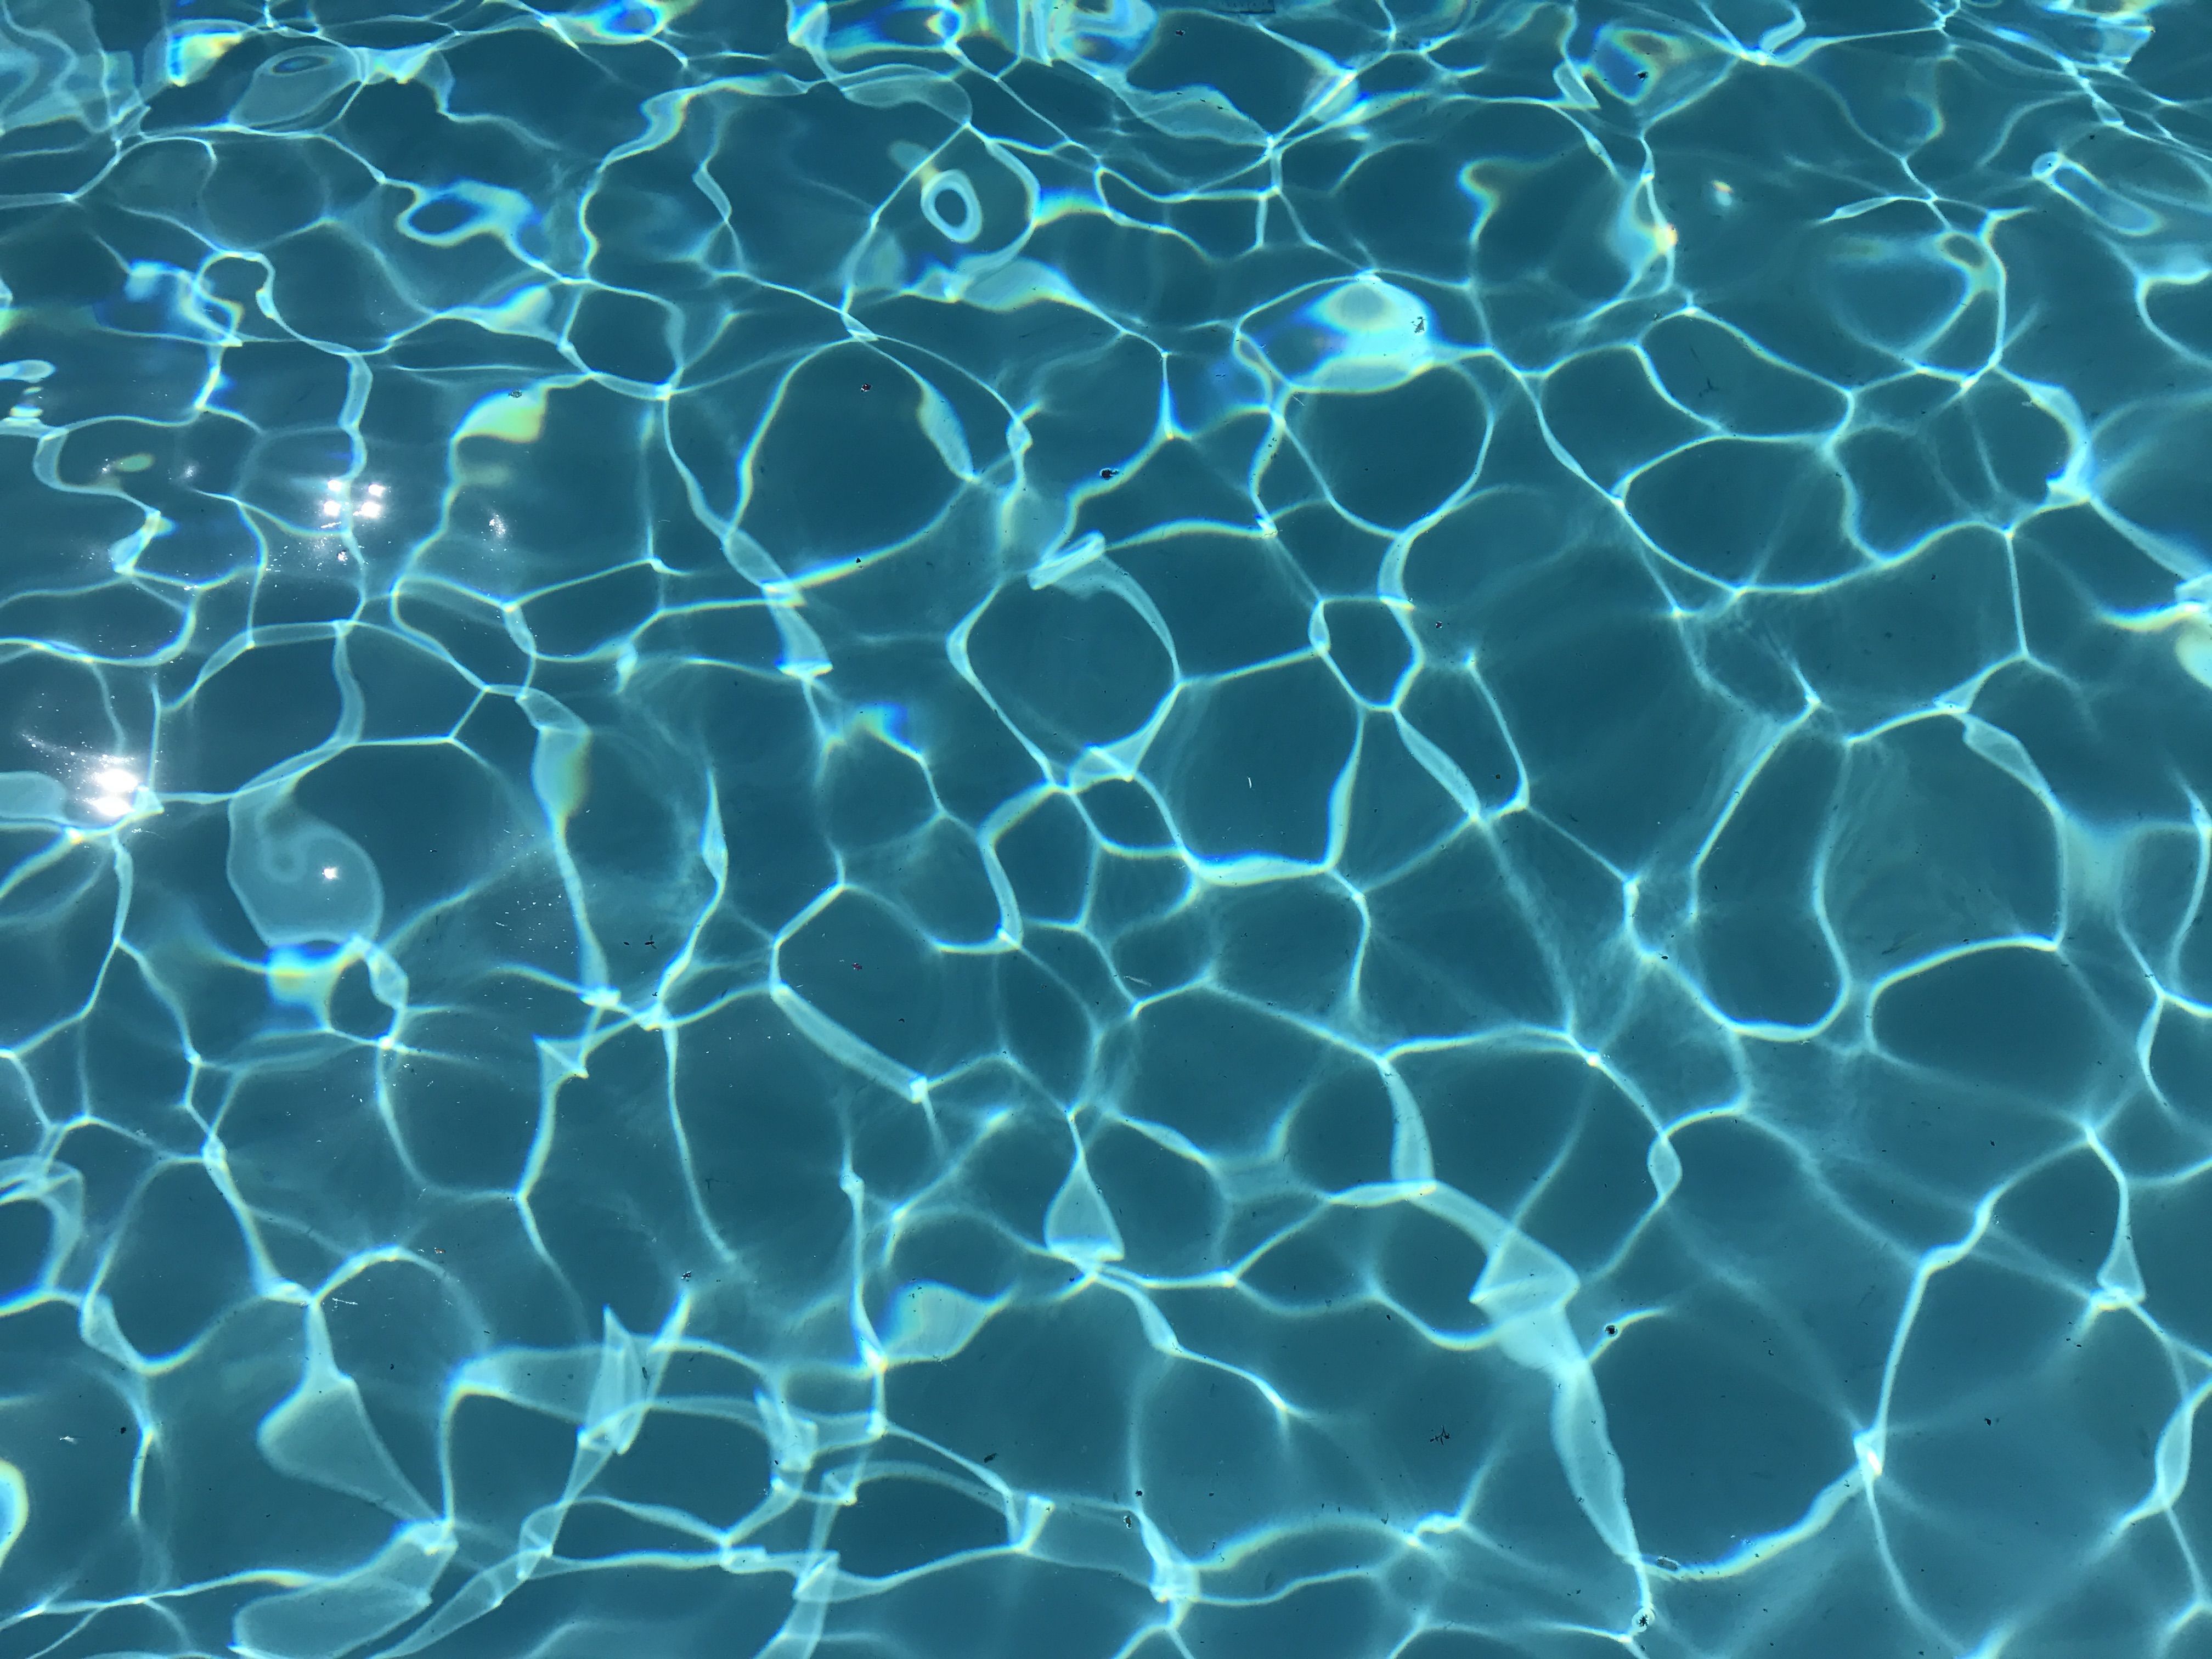 A close up of the water in an outdoor pool - Aqua, water, swimming pool